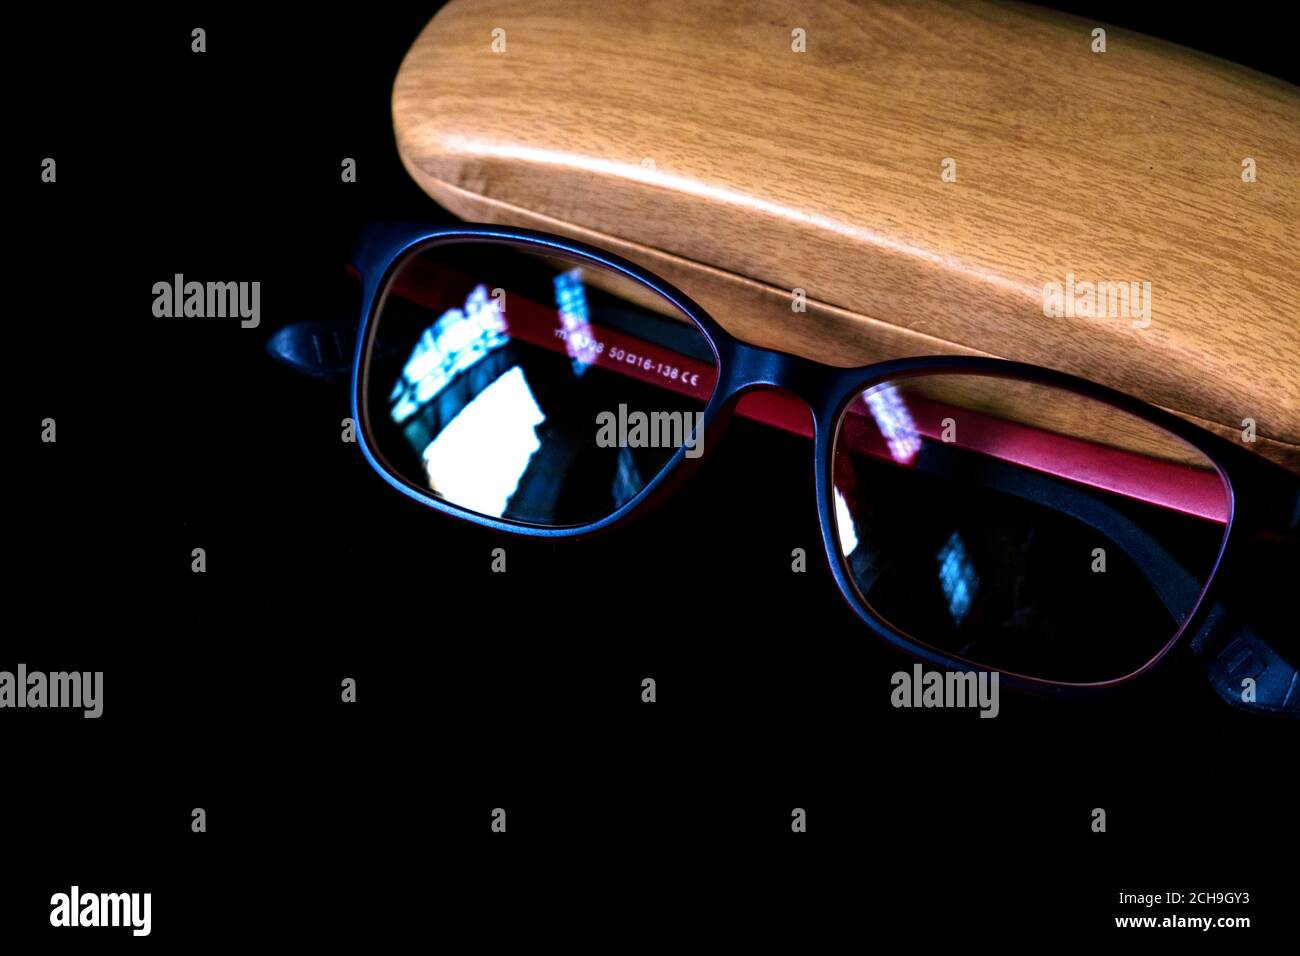 specs and specs box black background blurred shallow depth of field Stock Photo